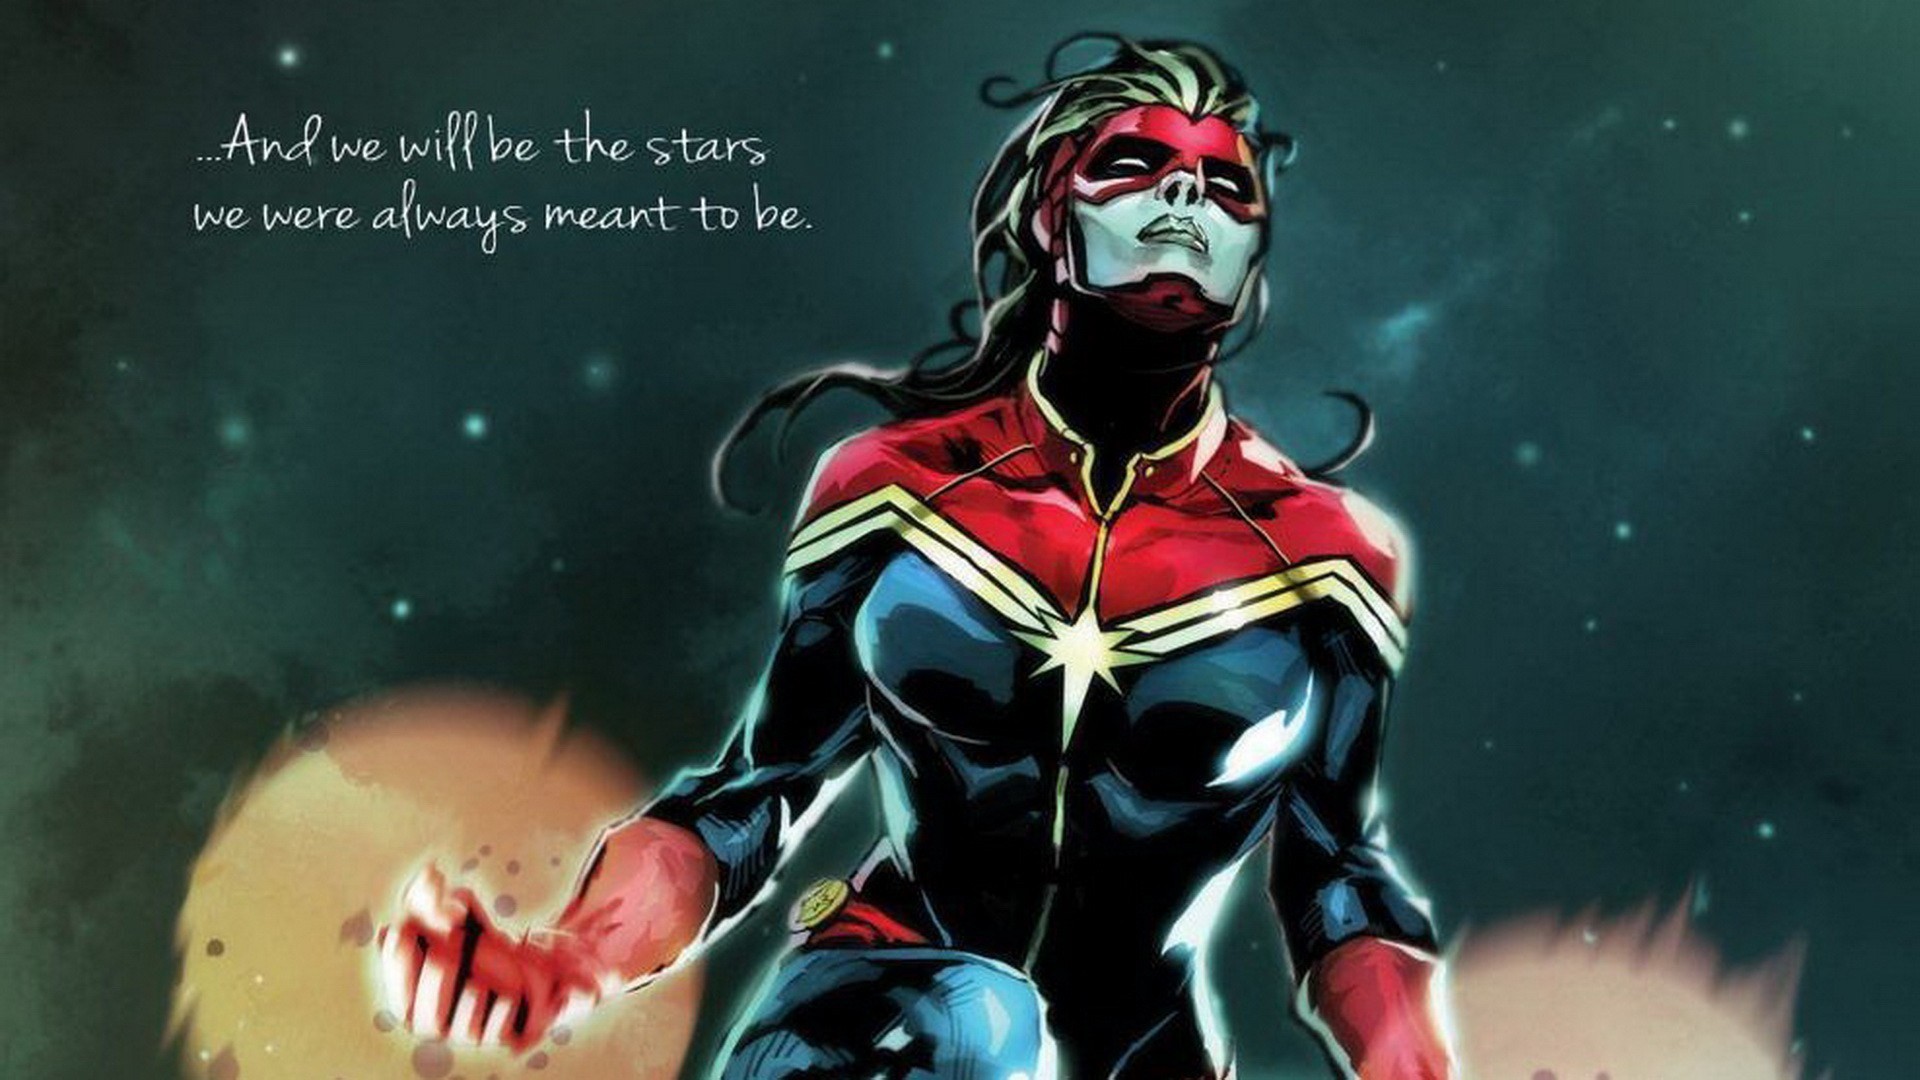 Captain Marvel Animated Wallpaper with high-resolution 1920x1080 pixel. You can use this poster wallpaper for your Desktop Computers, Mac Screensavers, Windows Backgrounds, iPhone Wallpapers, Tablet or Android Lock screen and another Mobile device